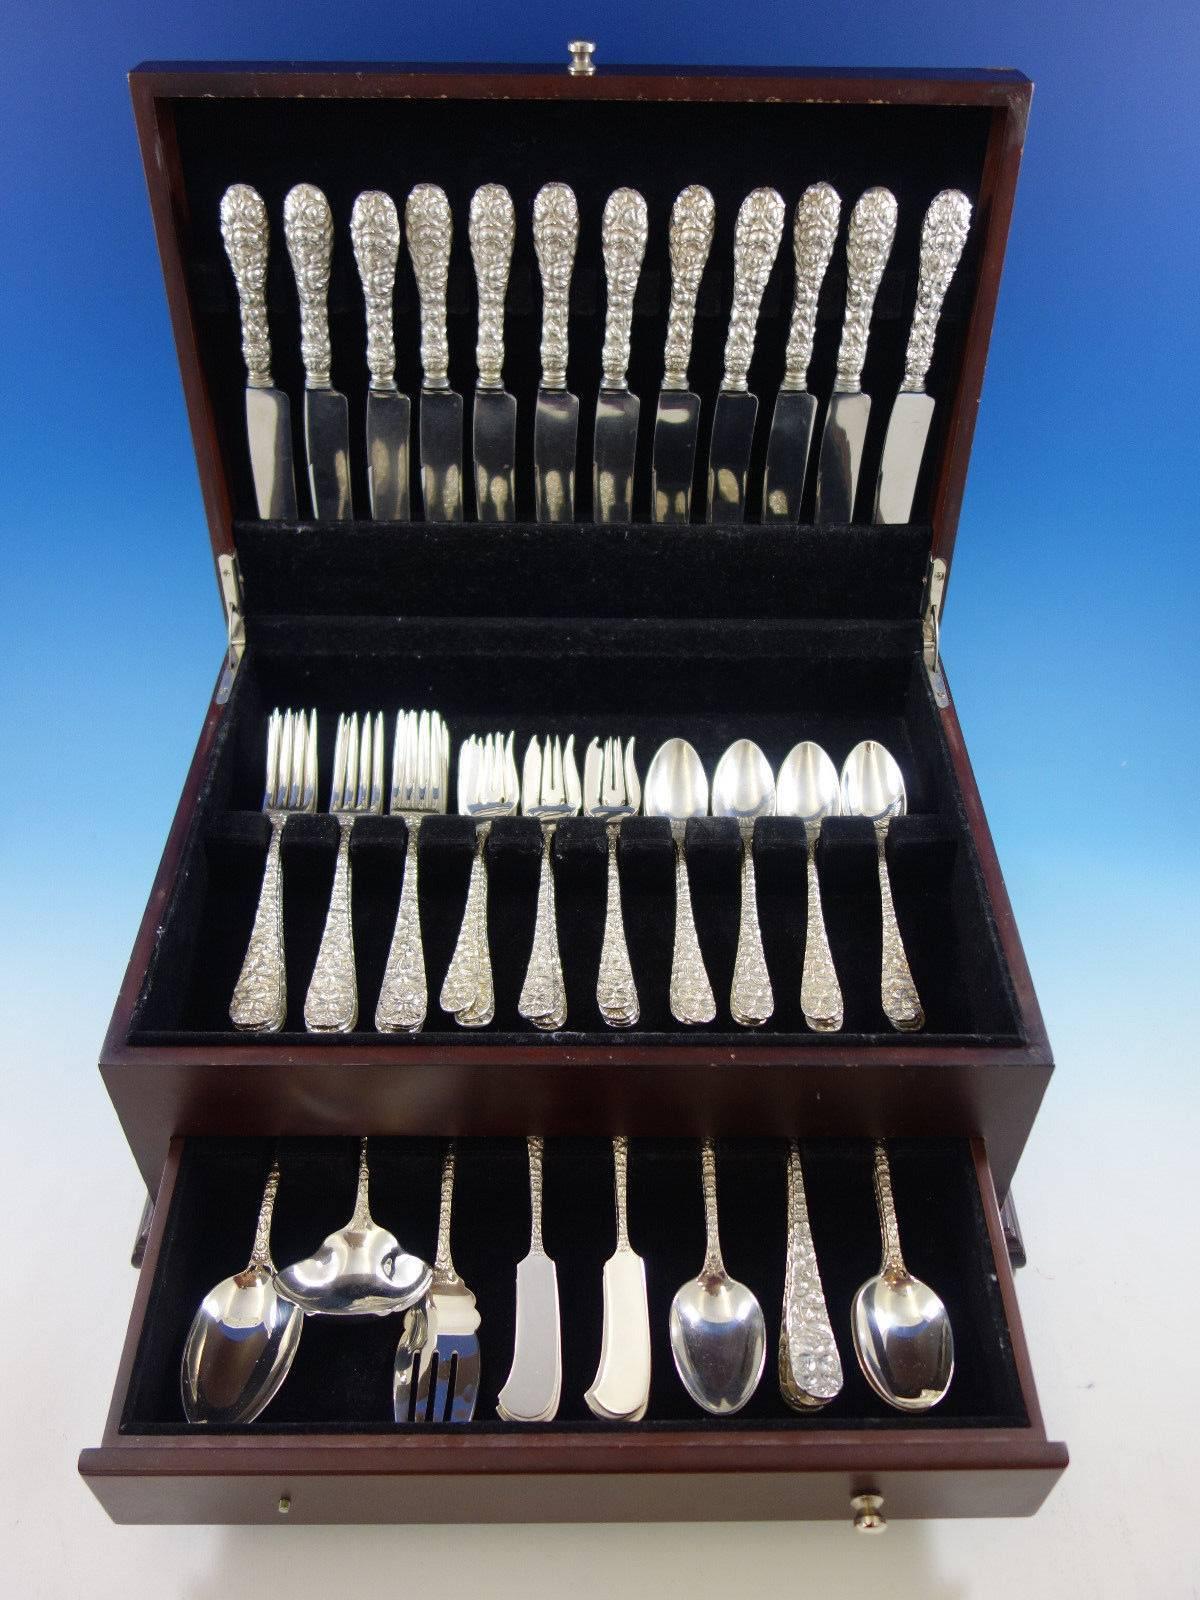 Baltimore Rose by Schofield sterling silver repoussed flatware set, 75 pieces. This set includes: 

12 knives, 8 3/4